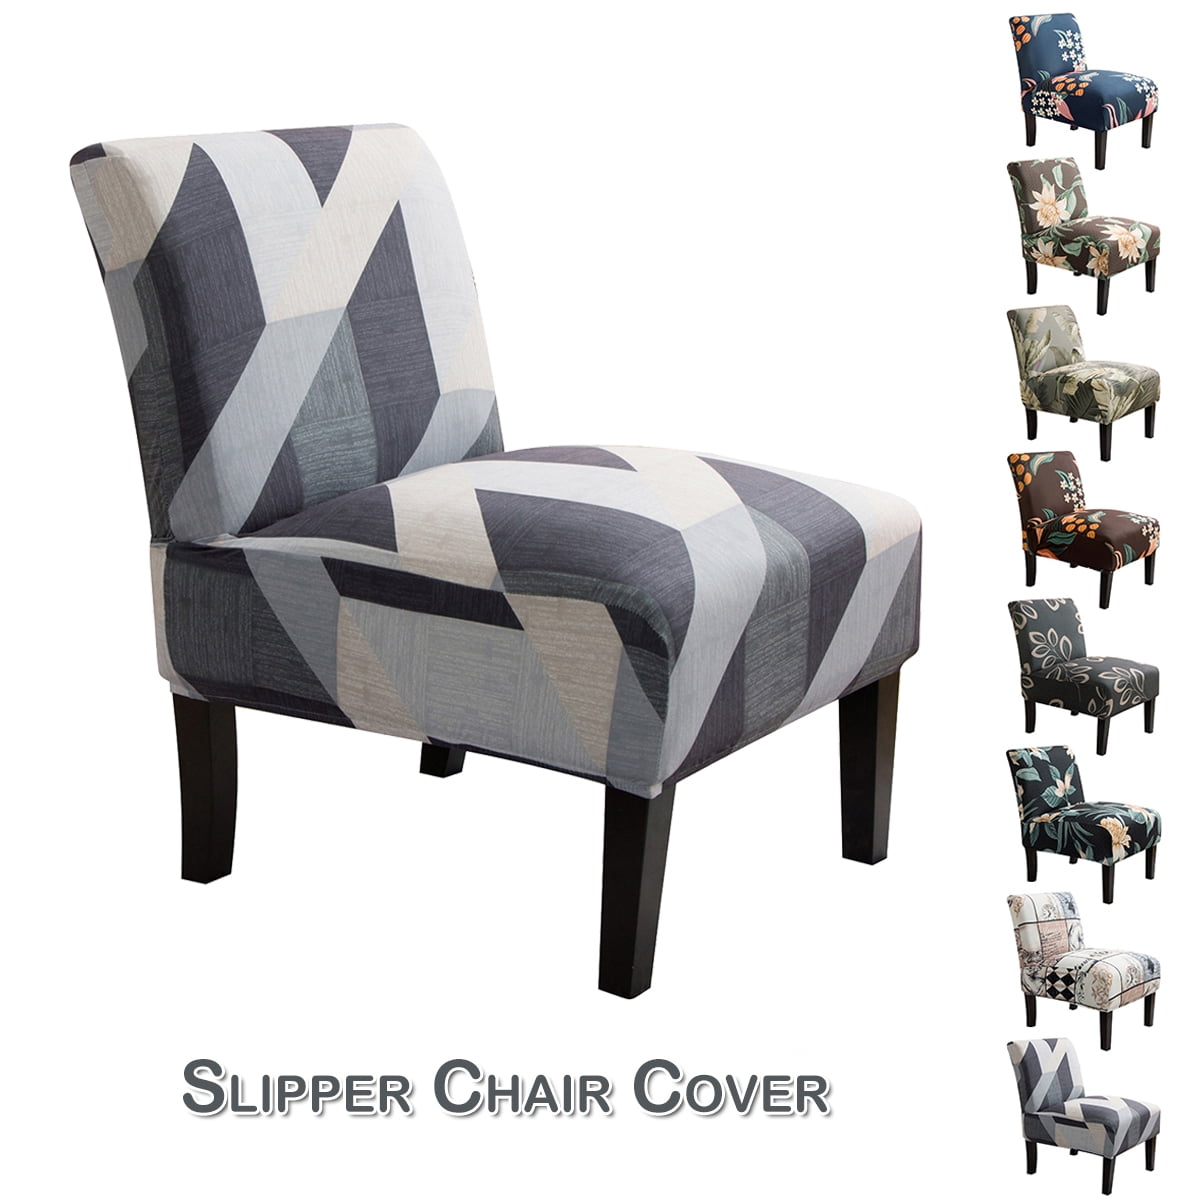 Minimalist Accent Chair Covers Walmart for Small Space